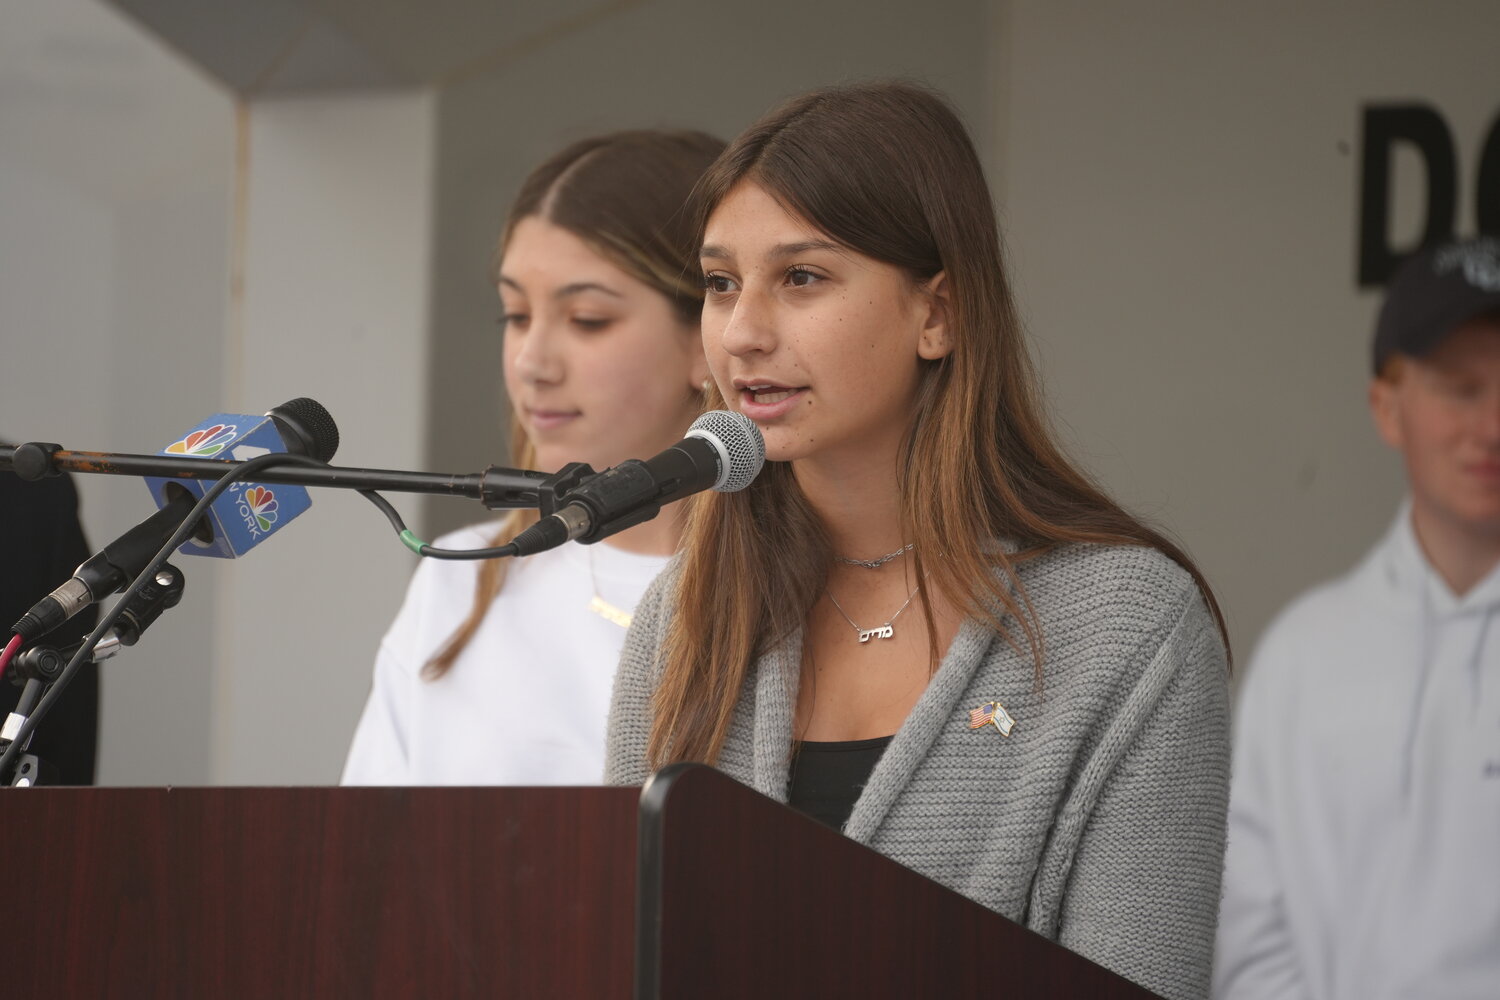 Madison Lange, a John F. Kennedy High School student, spoke about her recent travels to Israel, and about why the attack feels personal to Jews around the world.